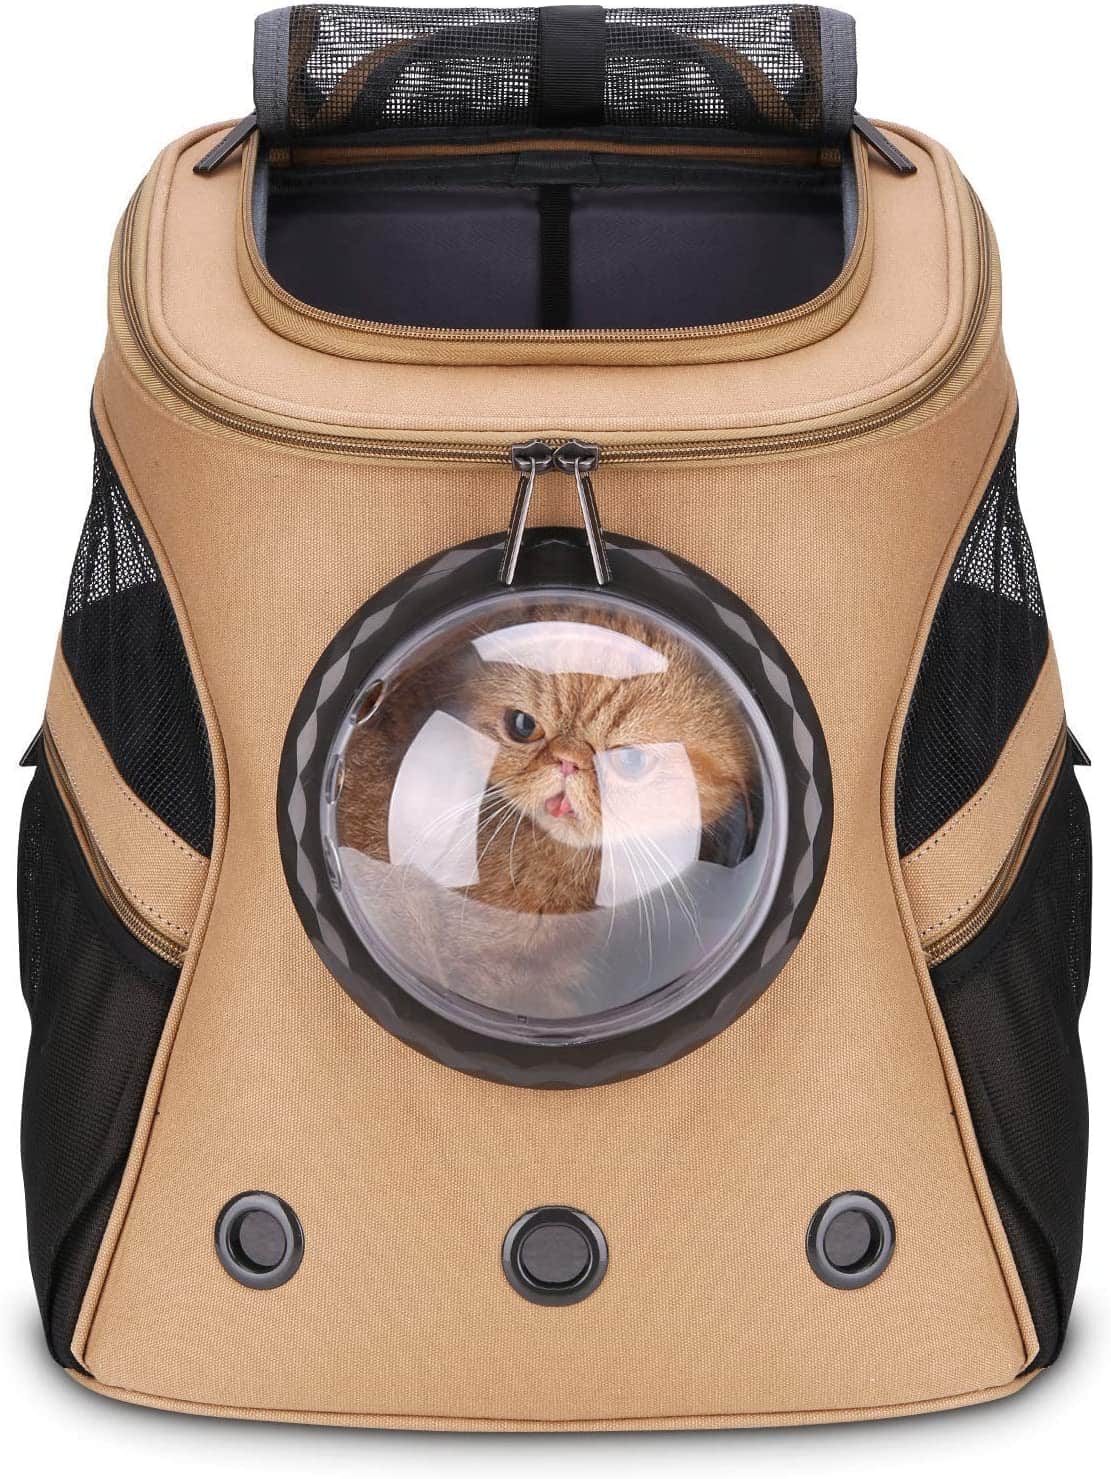 2. LOLLIMEOW Large Cat Backpack Carrier with Bubble